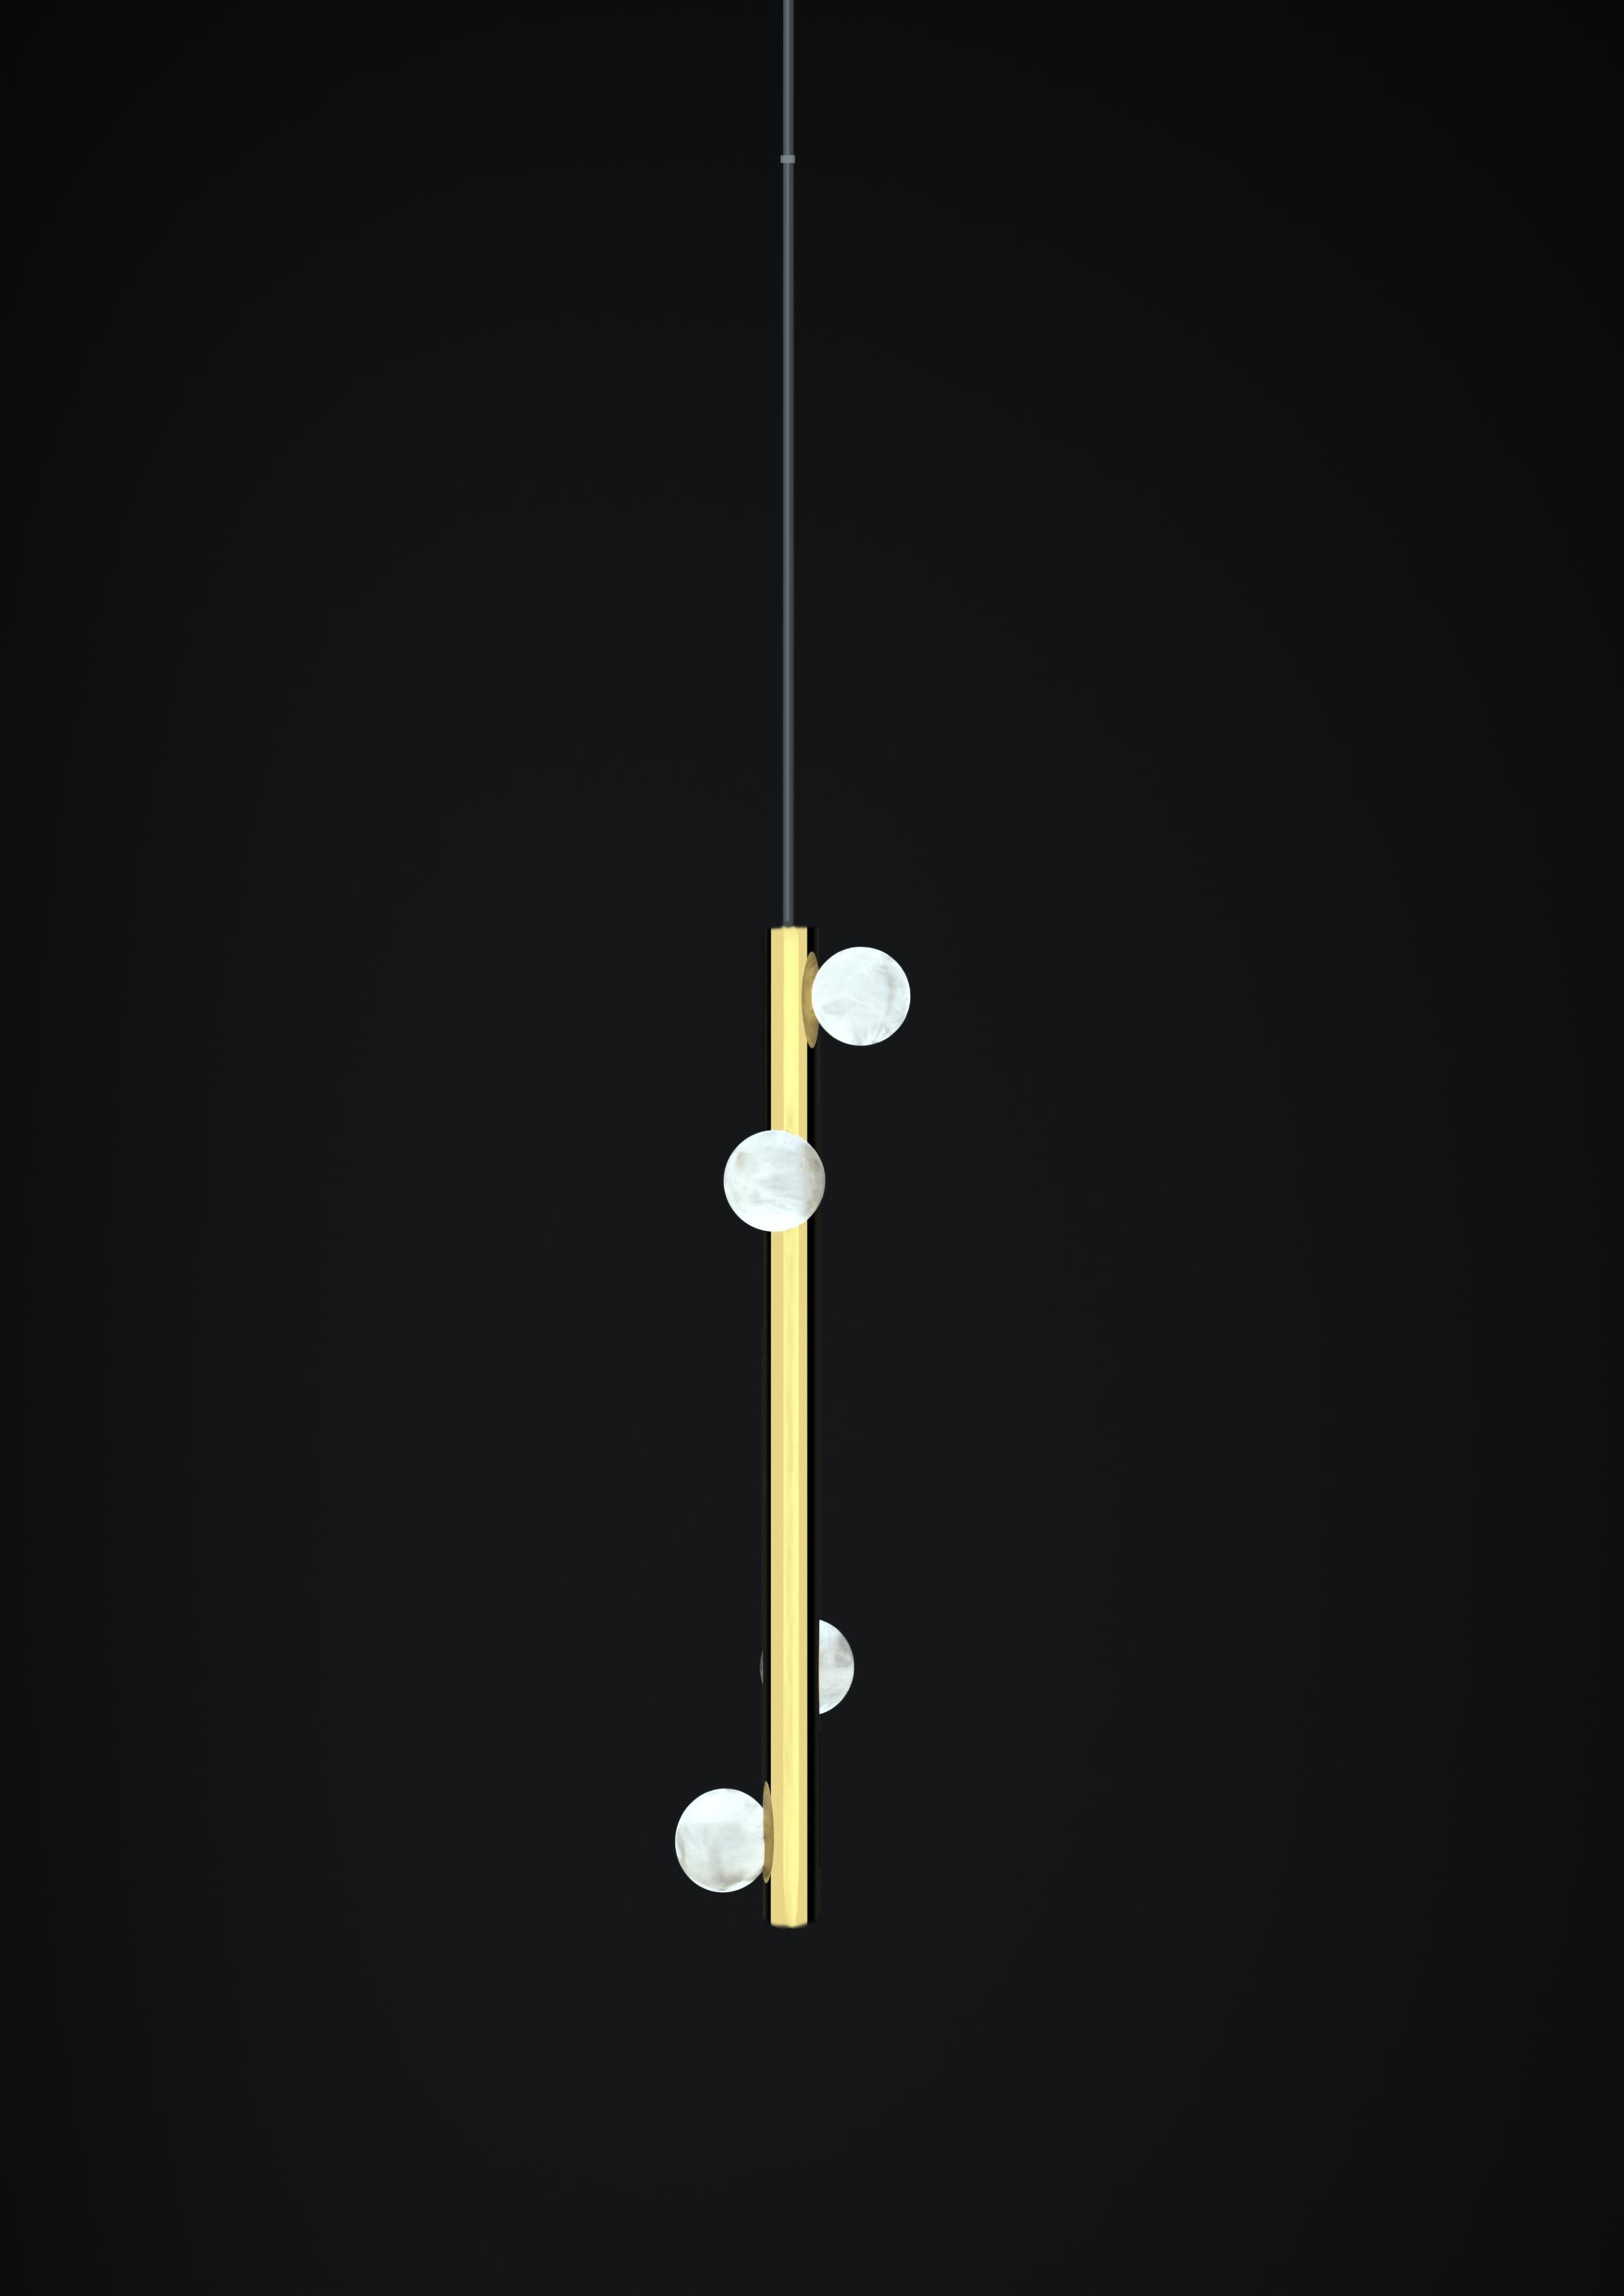 Demetra Shiny Gold Metal Pendant Lamp 2 by Alabastro Italiano Dimensions: D 12 x W 12 x H 60 cm.
Materials: White alabaster and metal.

Available in different finishes: Shiny Silver, Bronze, Brushed Brass, Ruggine of Florence, Brushed Burnished,